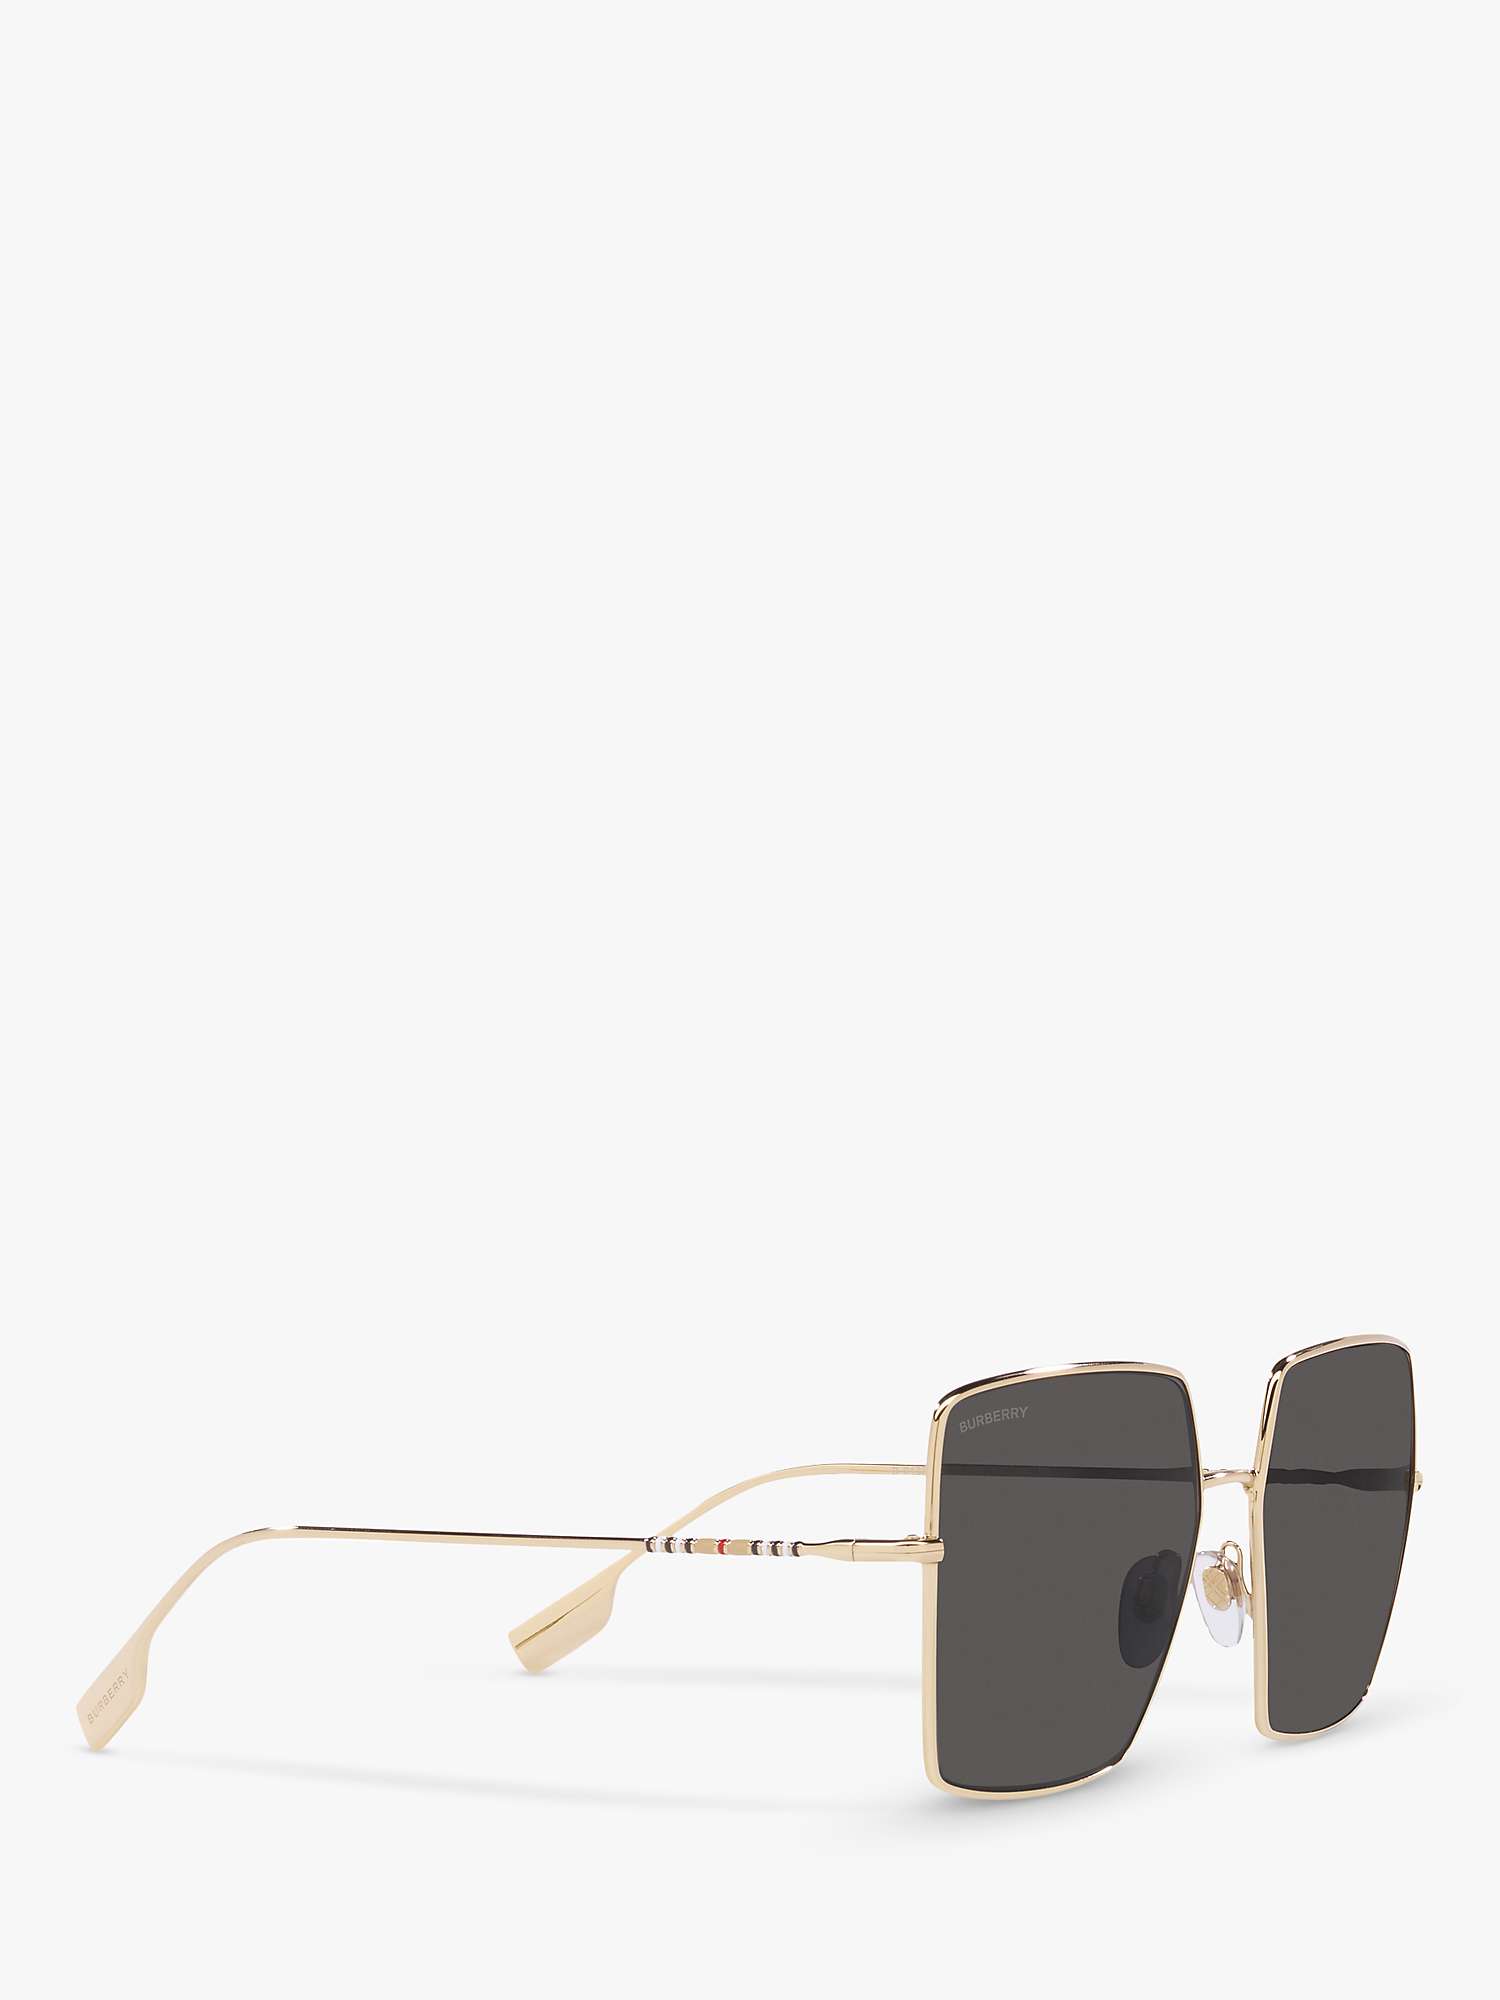 Buy Burberry BE3133 Women's Daphne Square Sunglasses, Gold/Grey Online at johnlewis.com